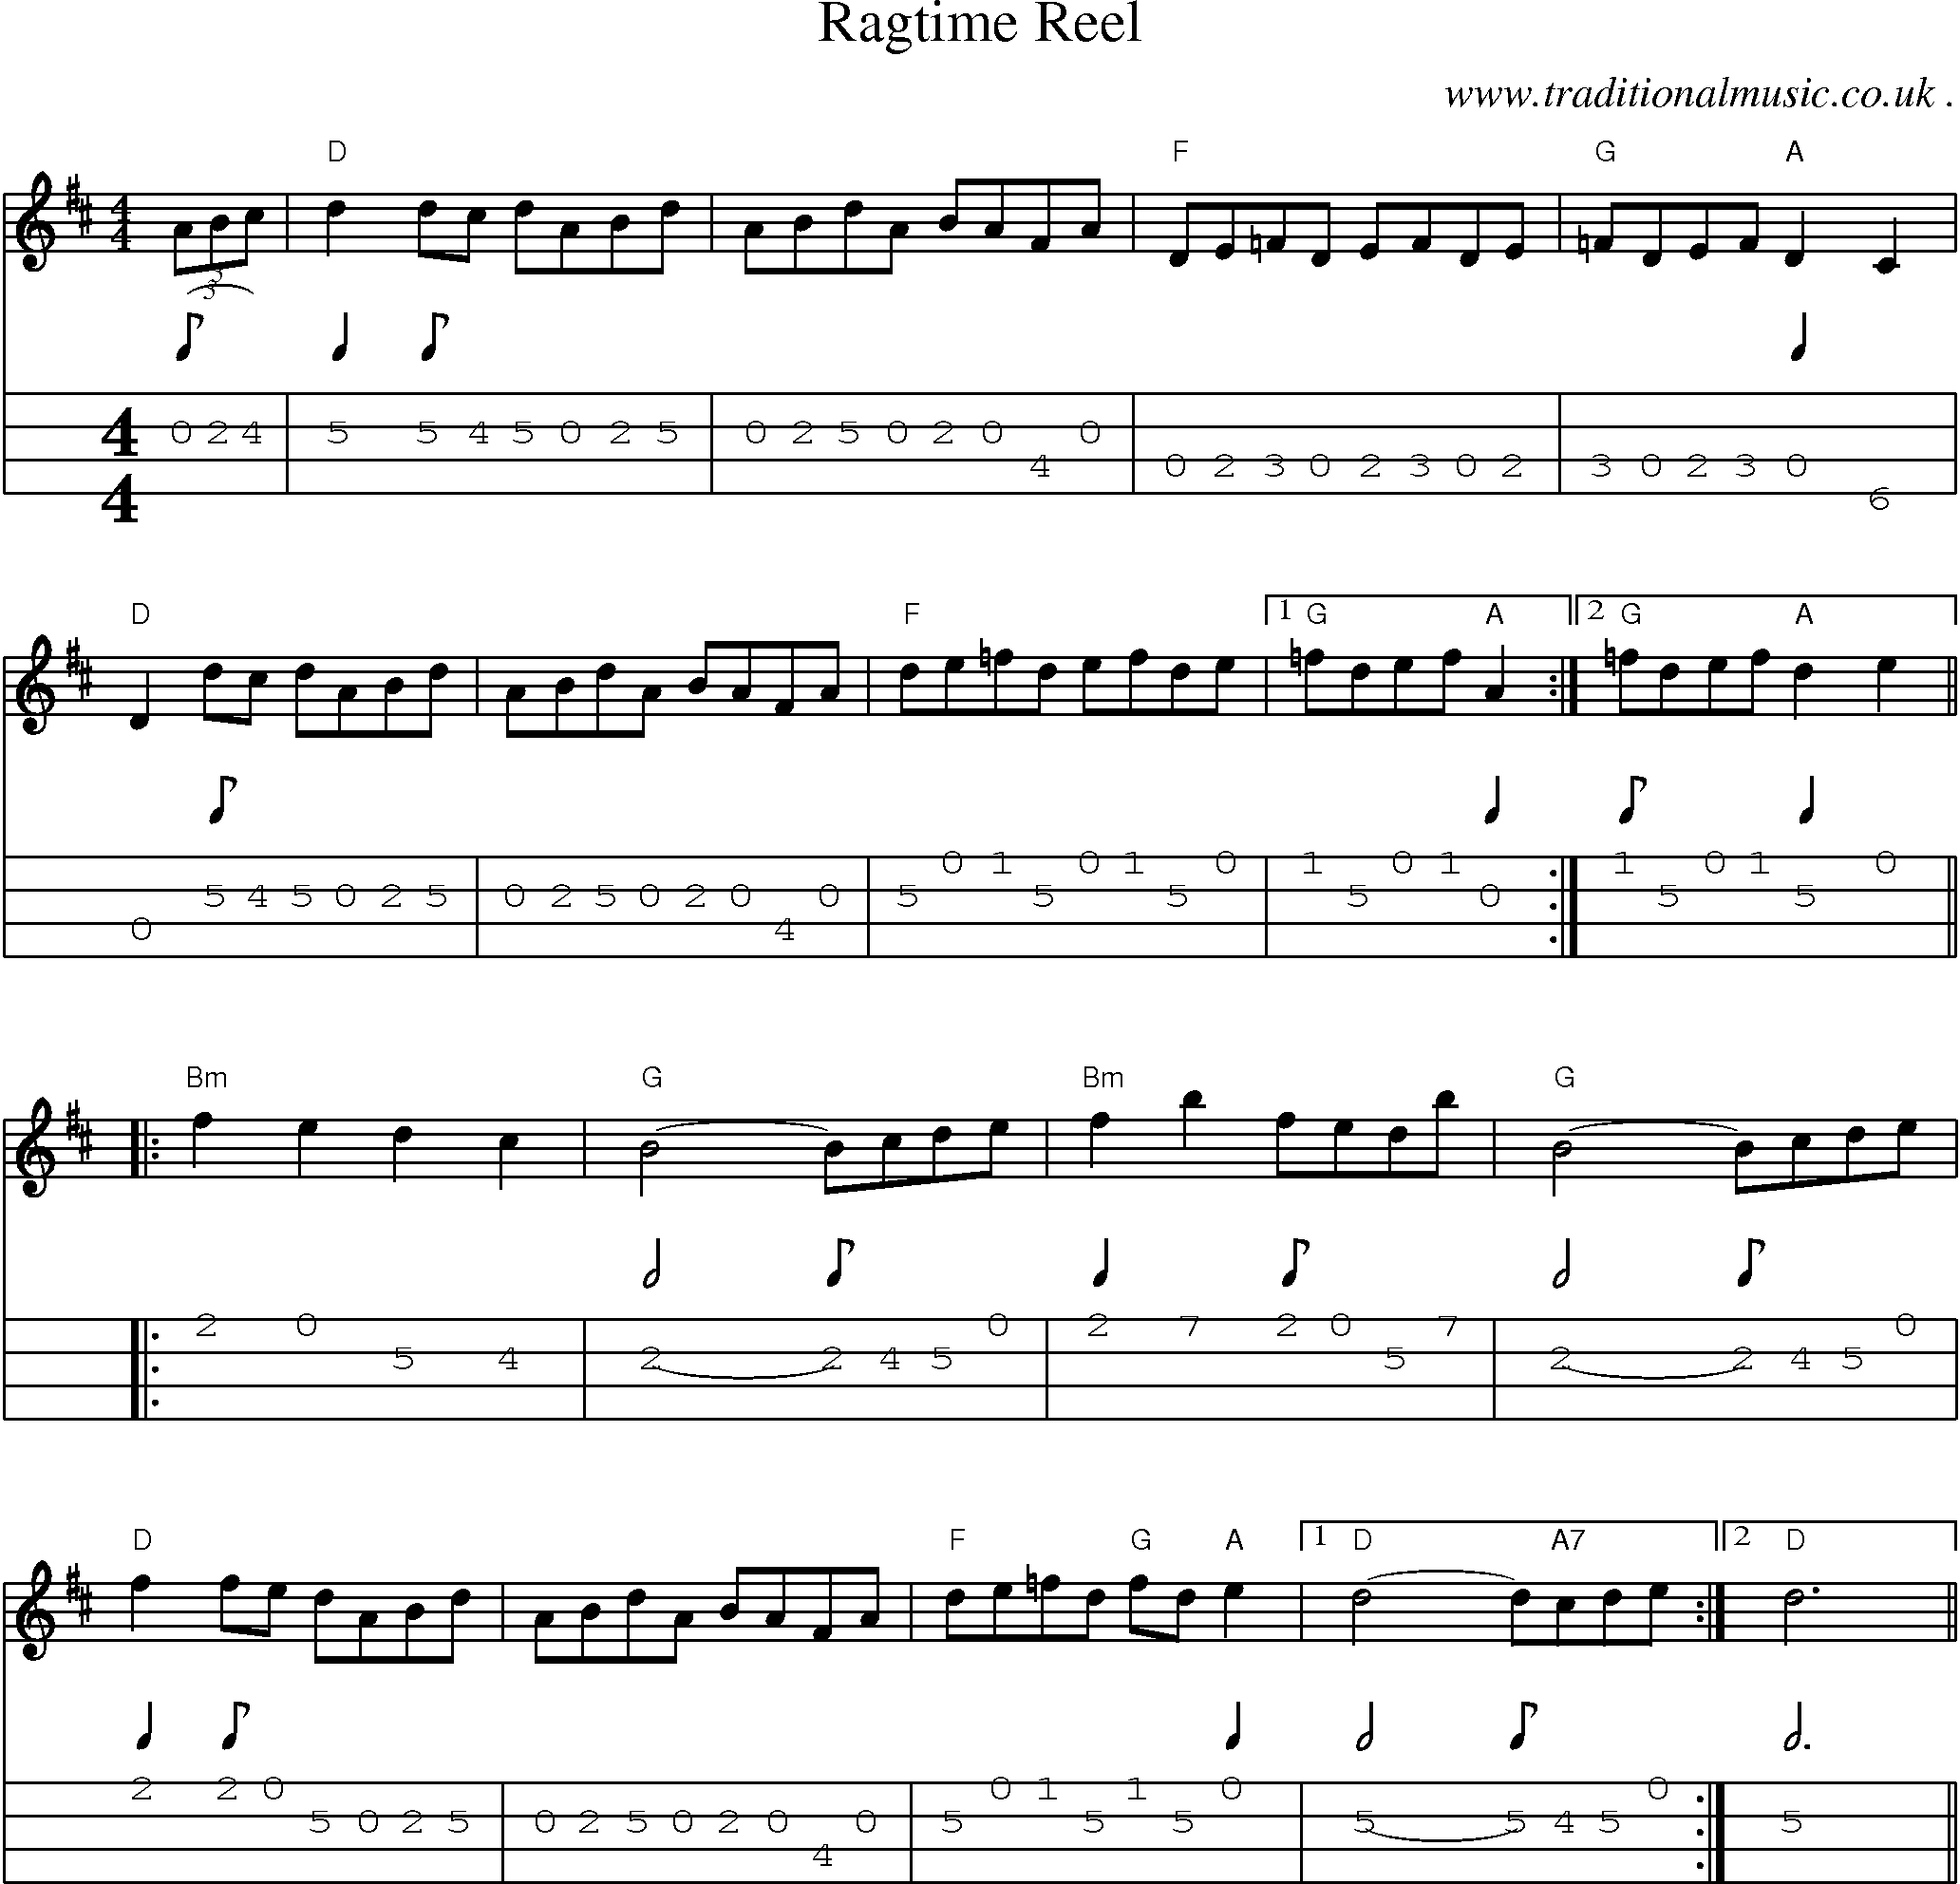 Music Score and Mandolin Tabs for Ragtime Reel